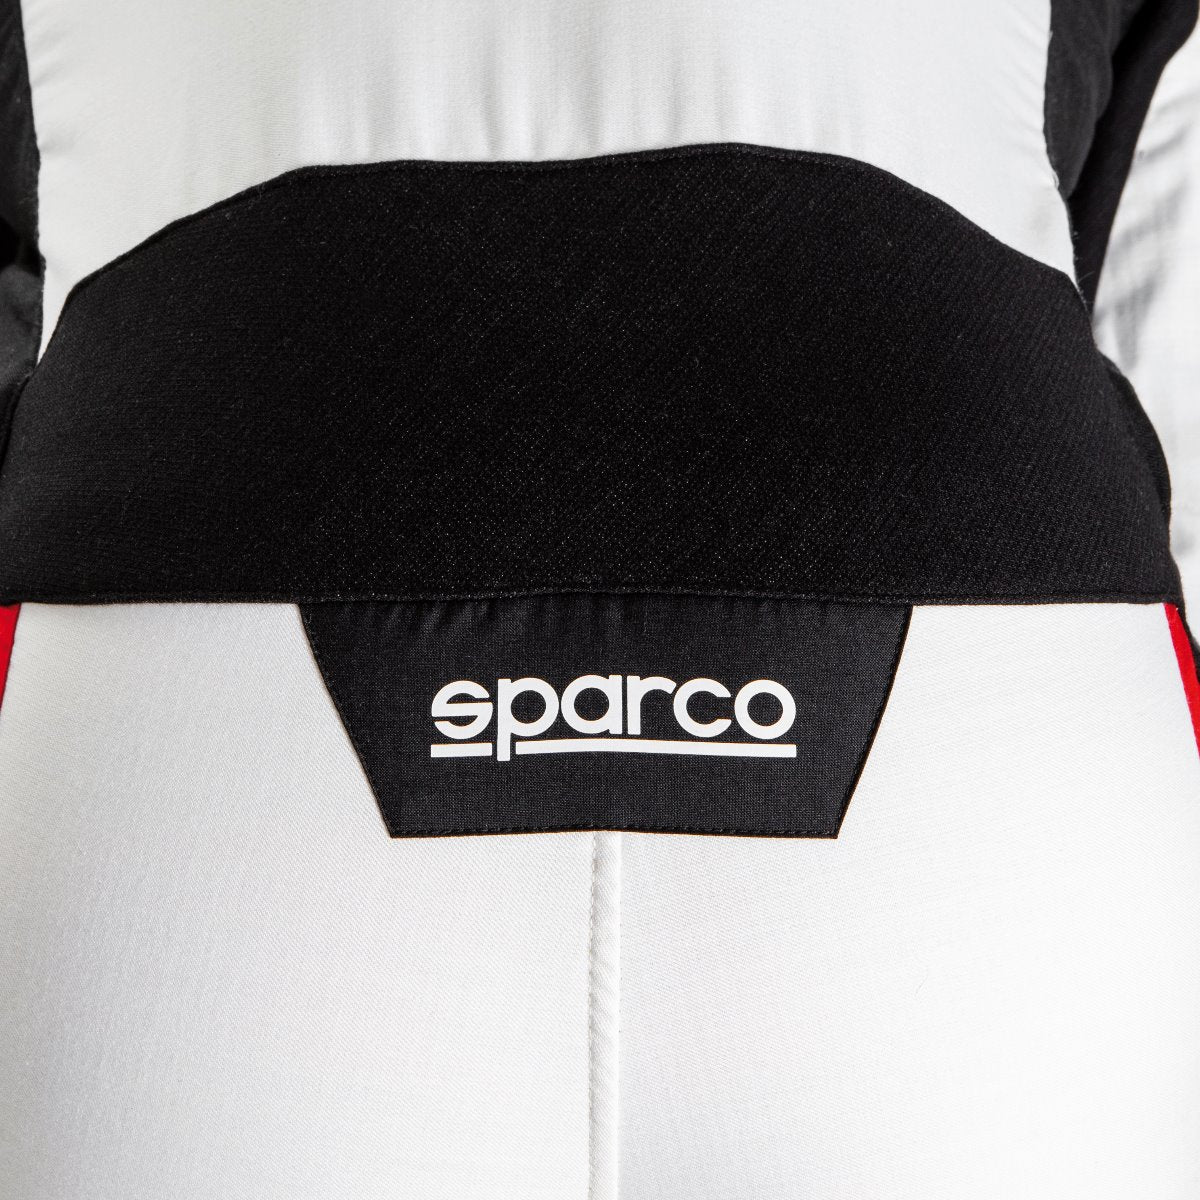 SPARCO VICTORY RACE SUIT  biggest discounts for the lowest price and the best deal on a suit 